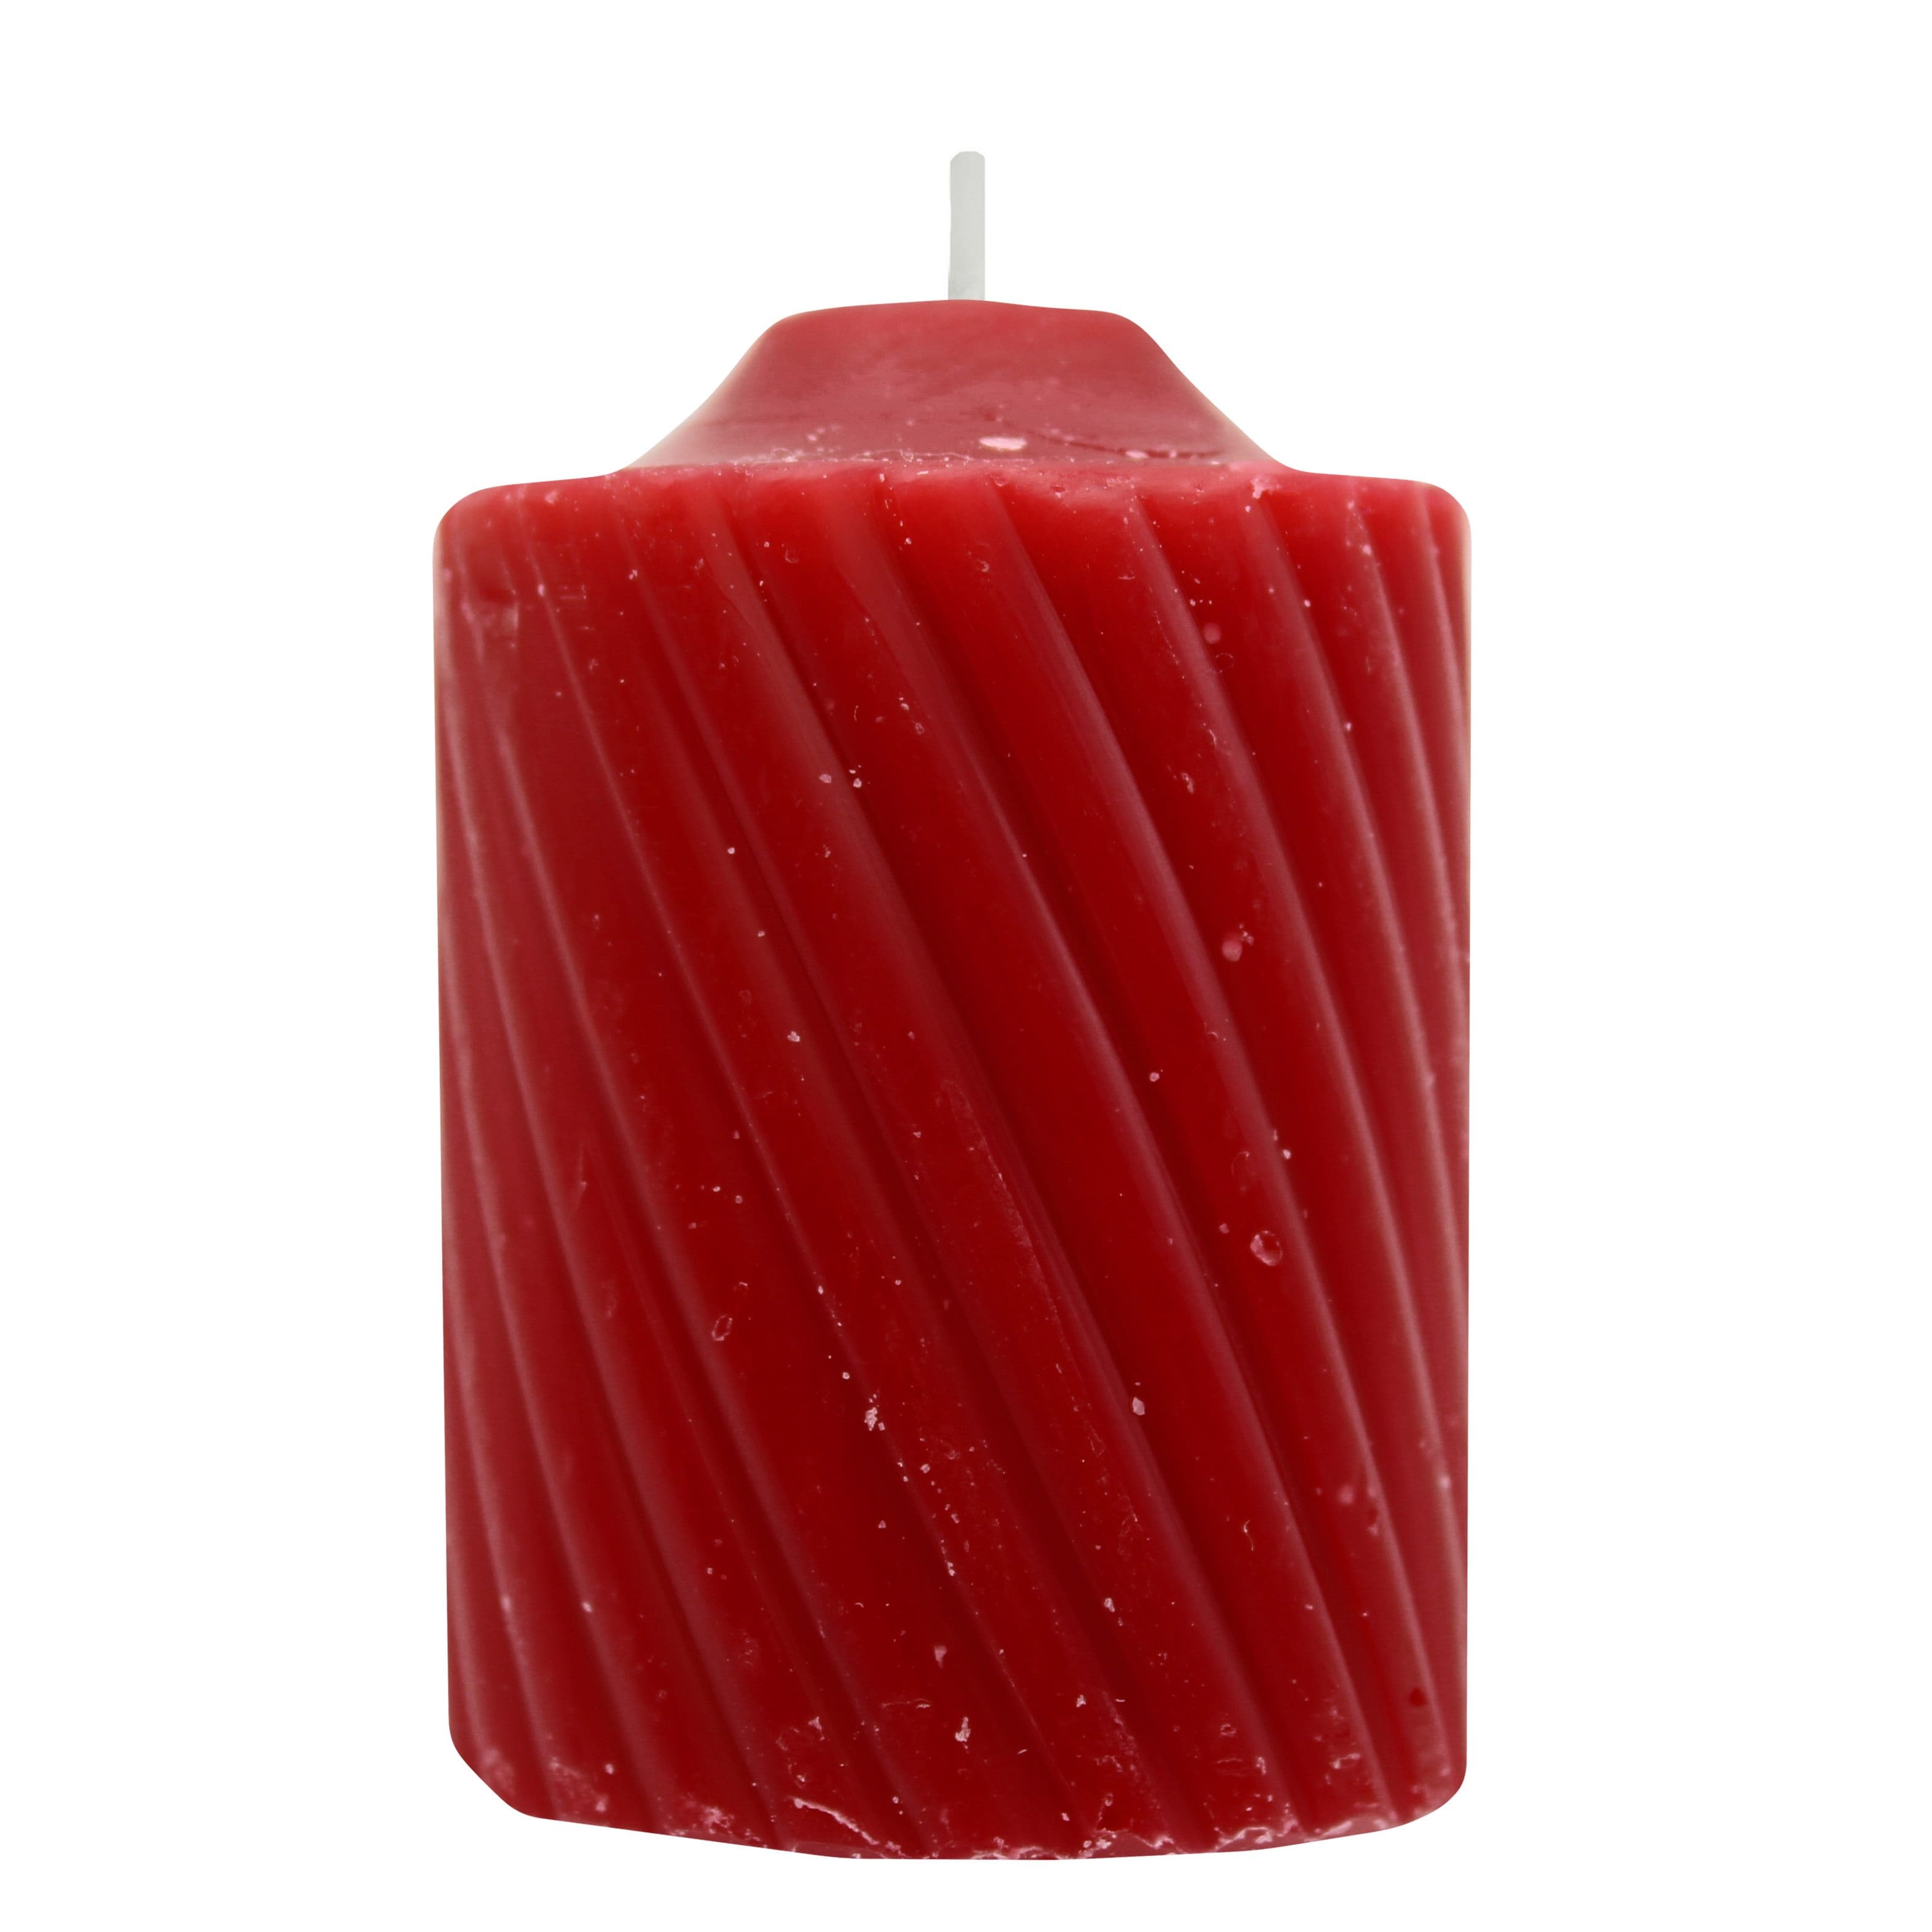 General Wax & Candle Co. Scented Votive Candles, 20ct.